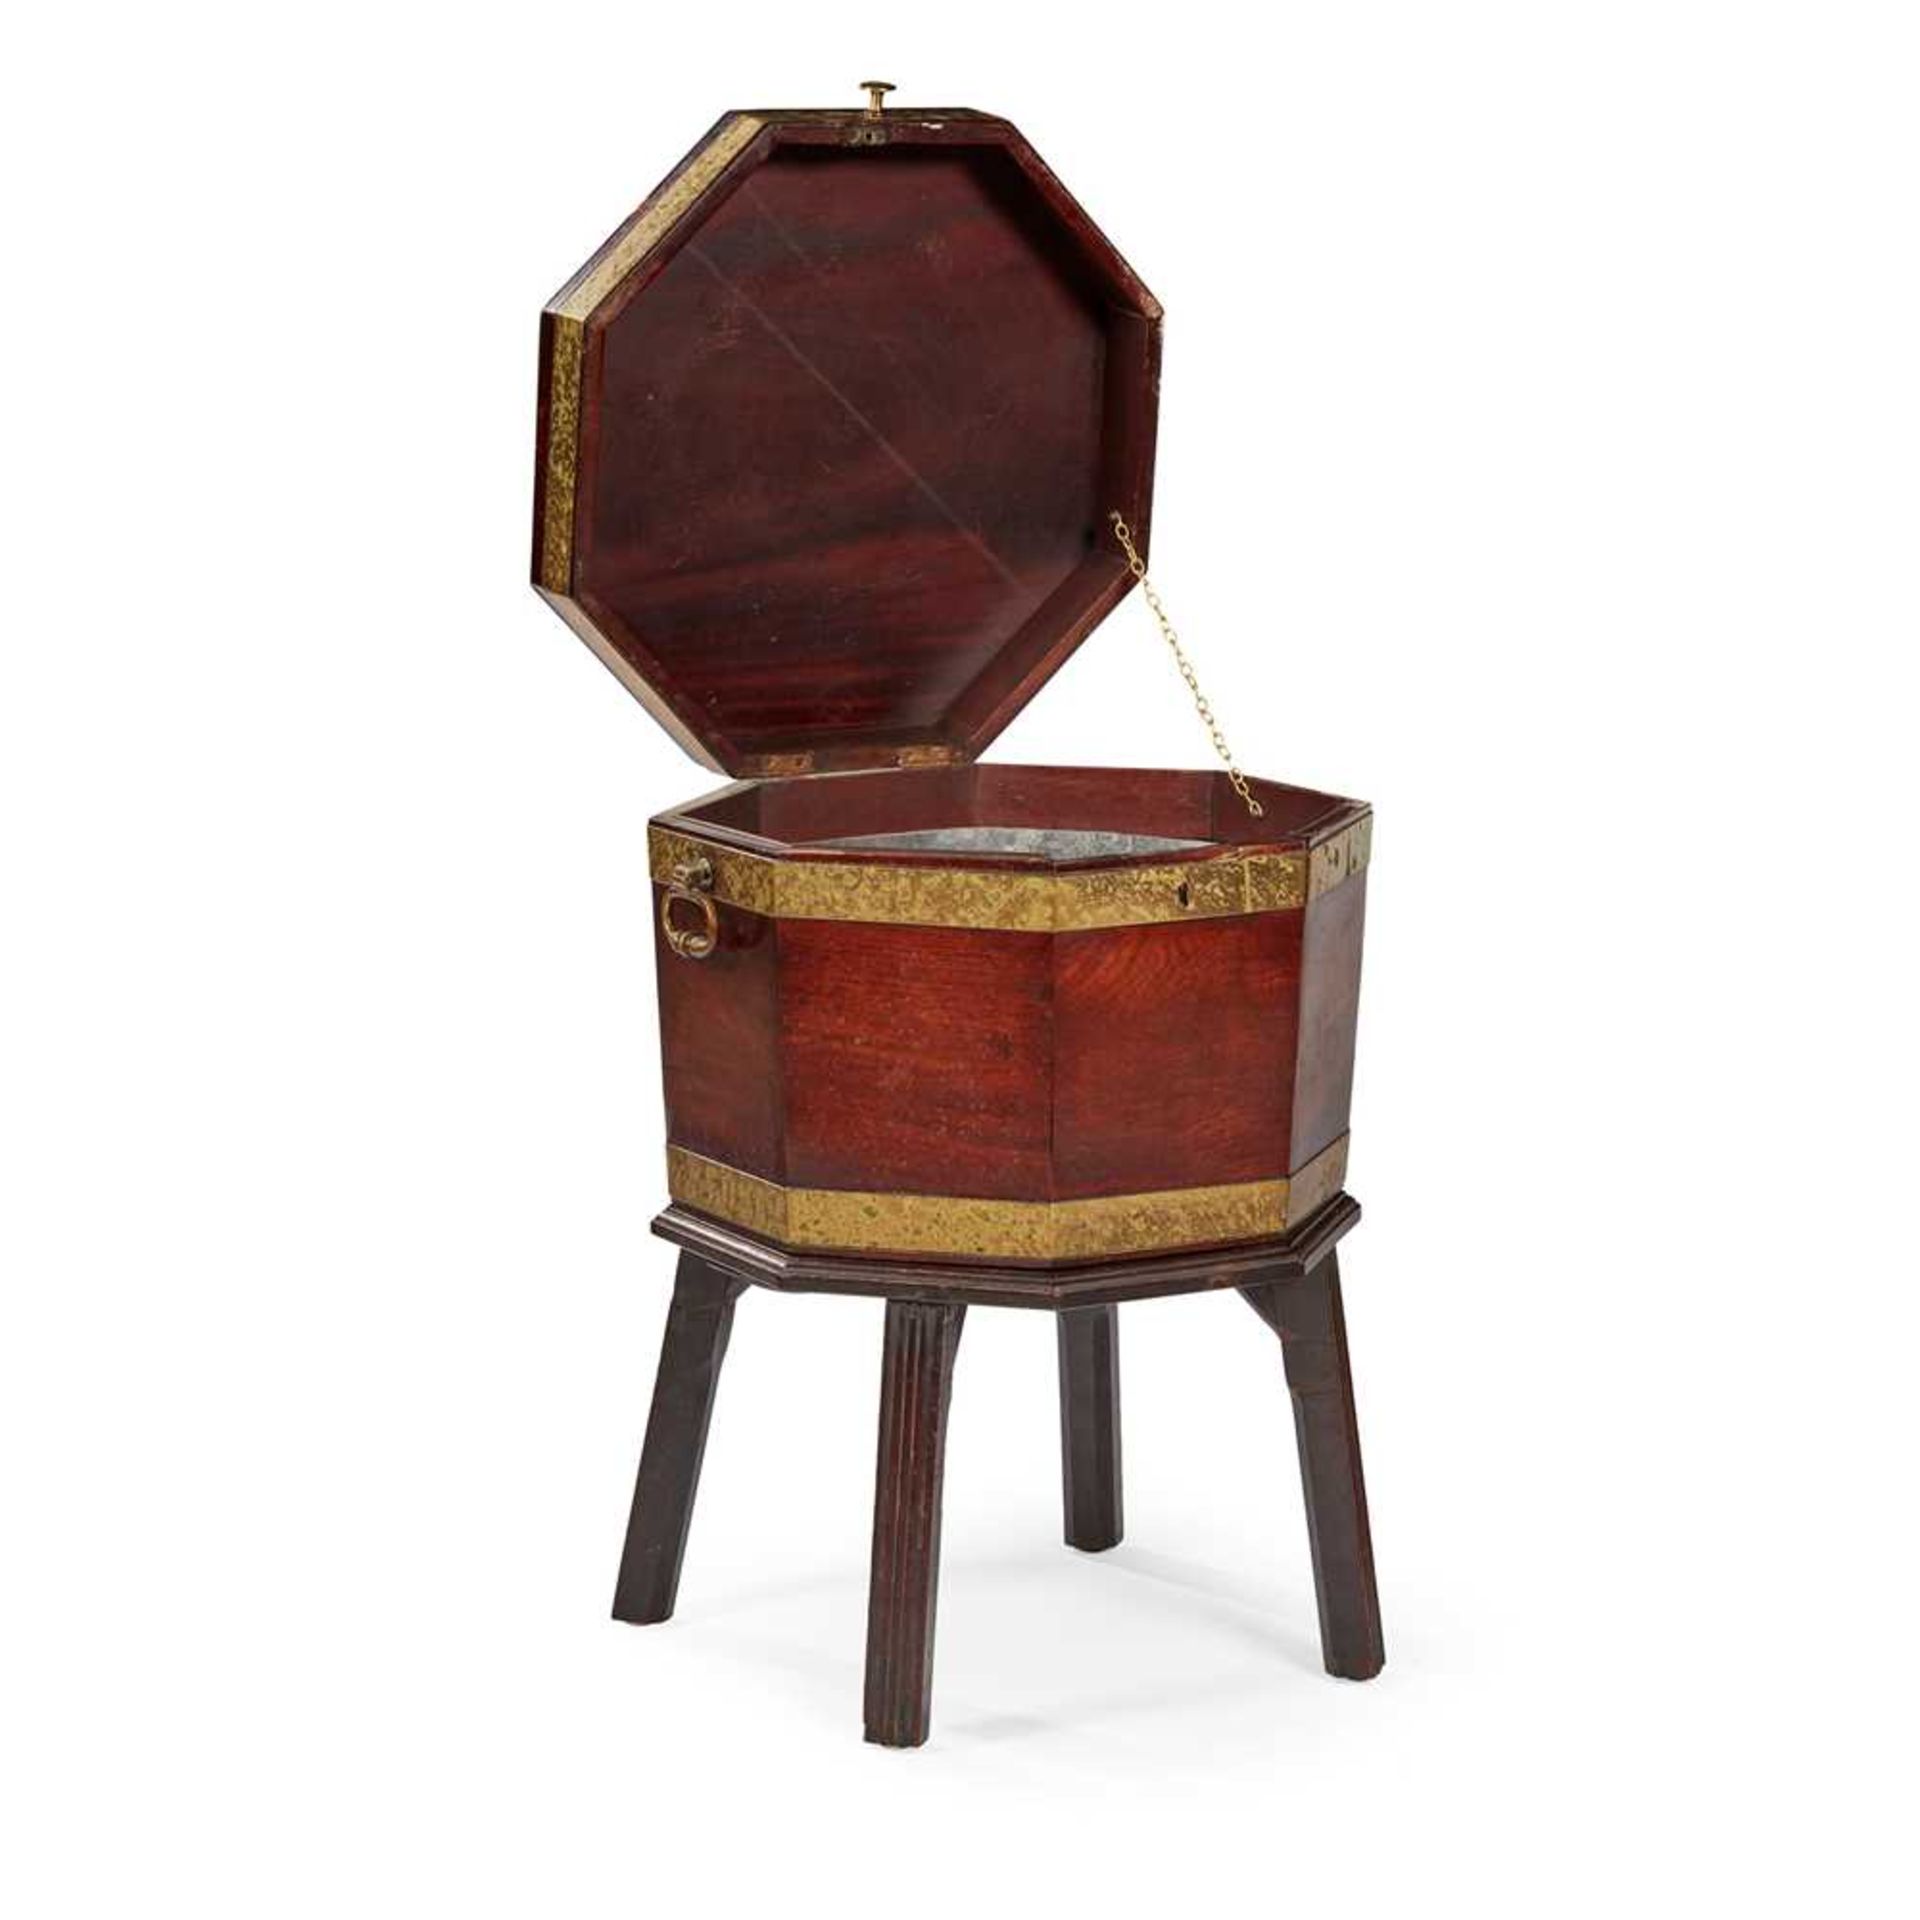 GEORGE III BRASS BANDED MAHOGANY OCTAGONAL WINE COOLER 18TH CENTURY - Image 2 of 2